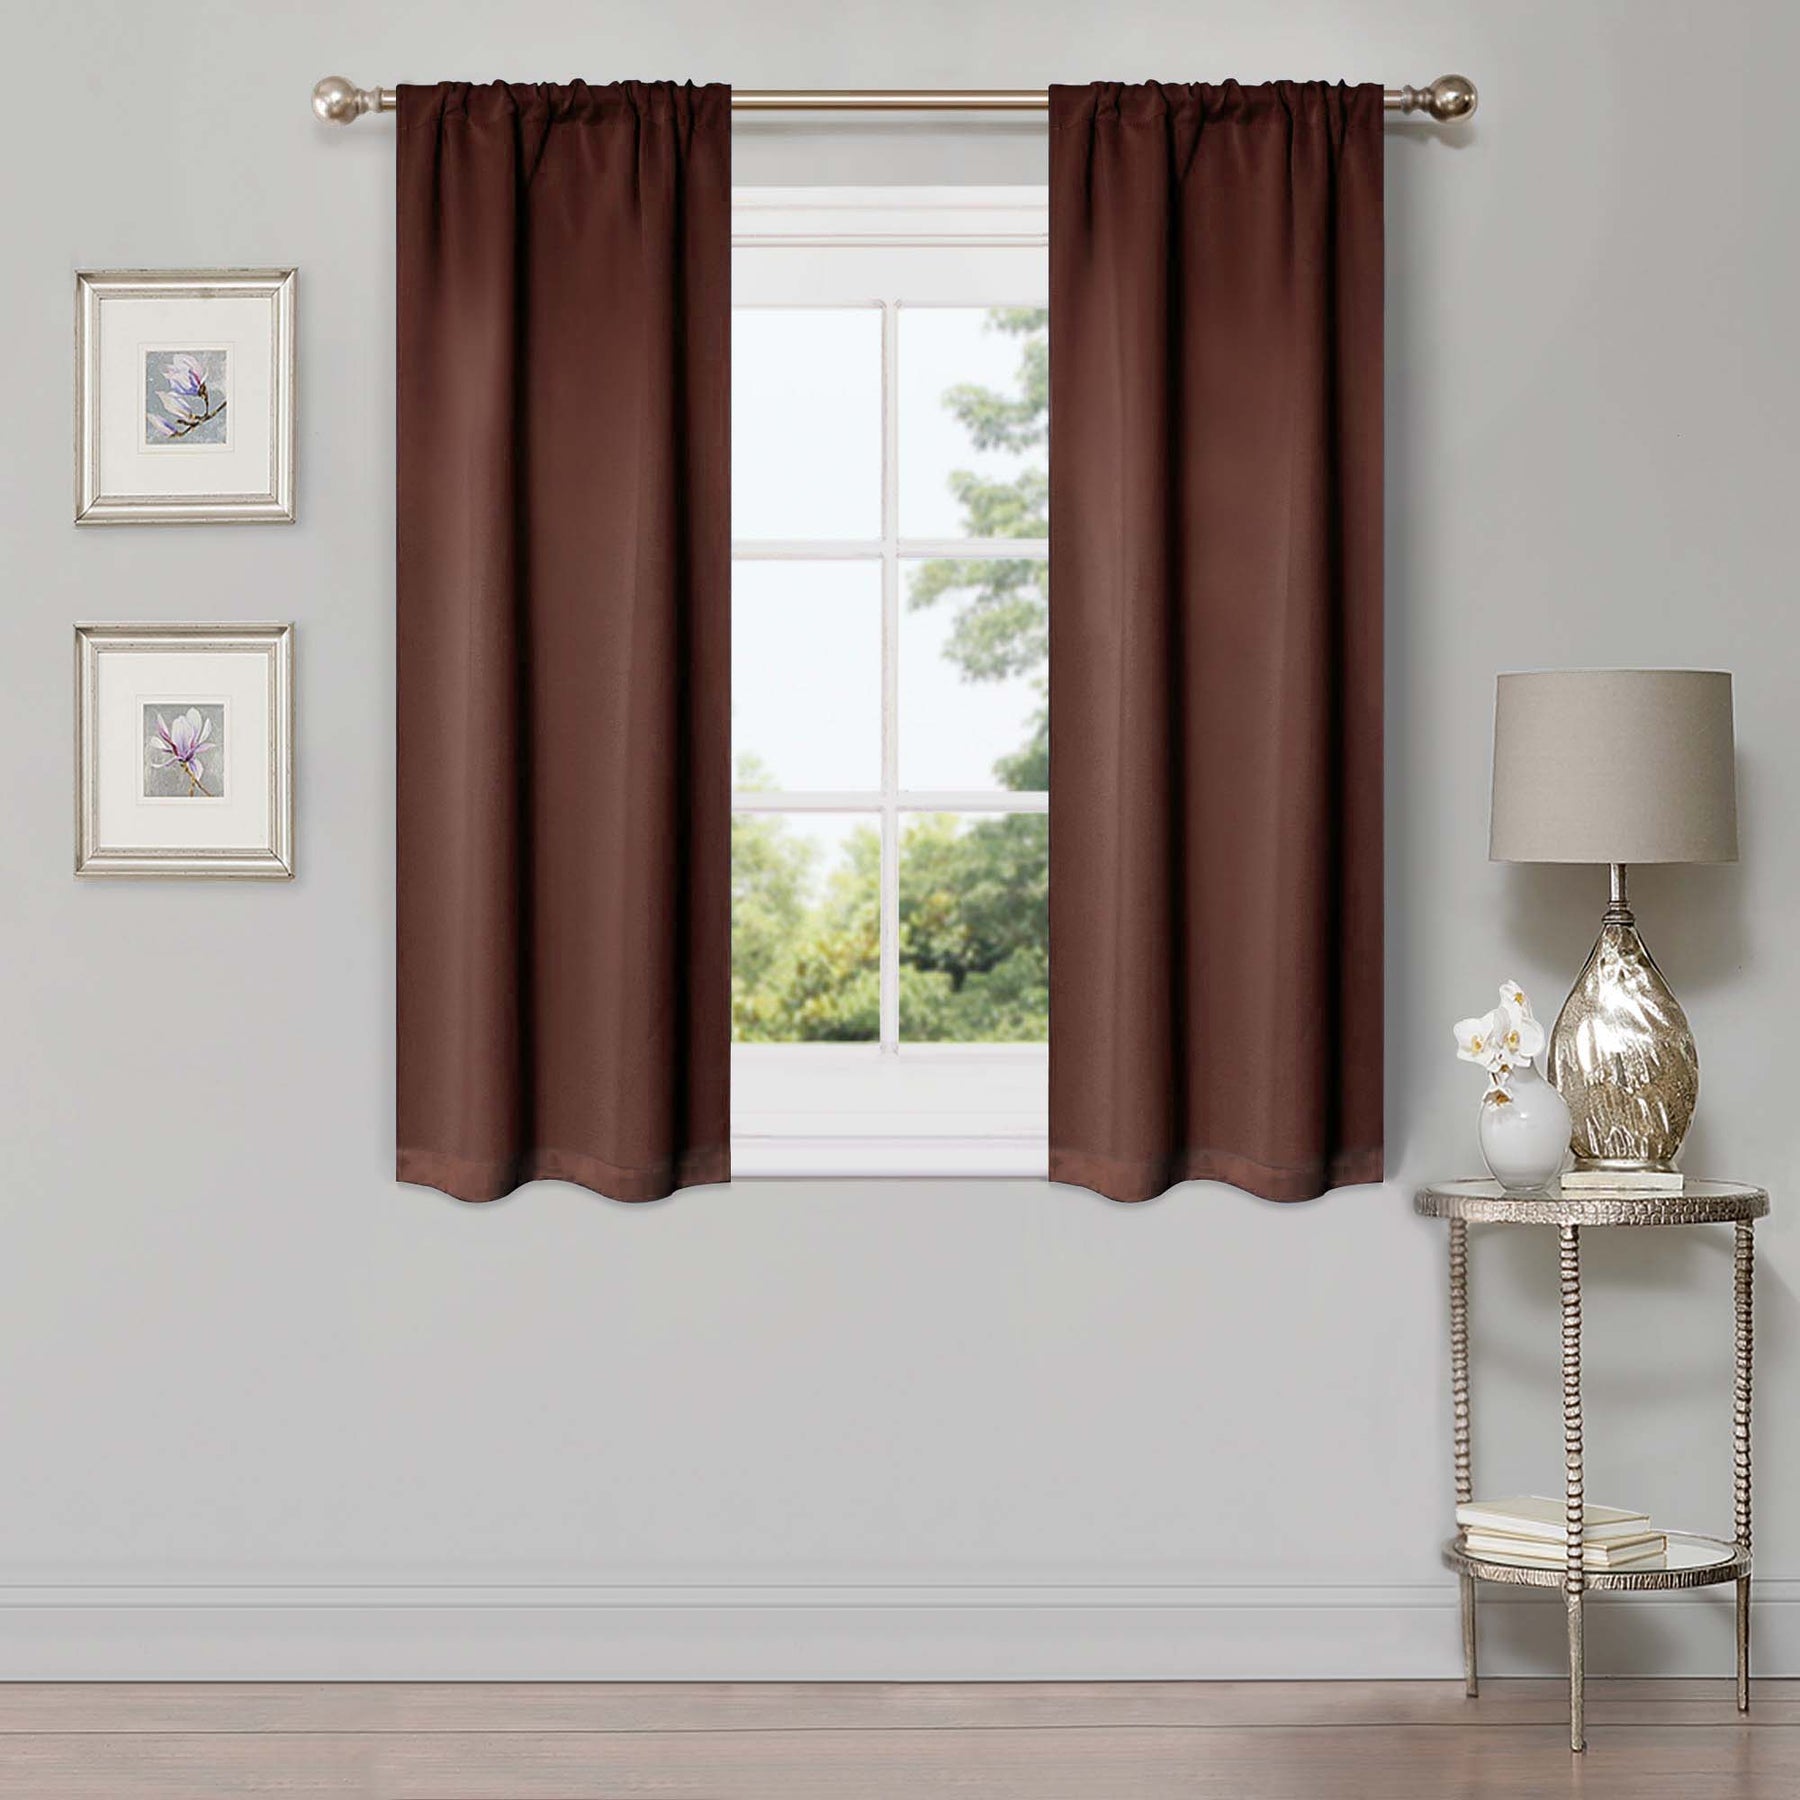 Solid Machine Washable Room Darkening Blackout Curtains - Cappuccino